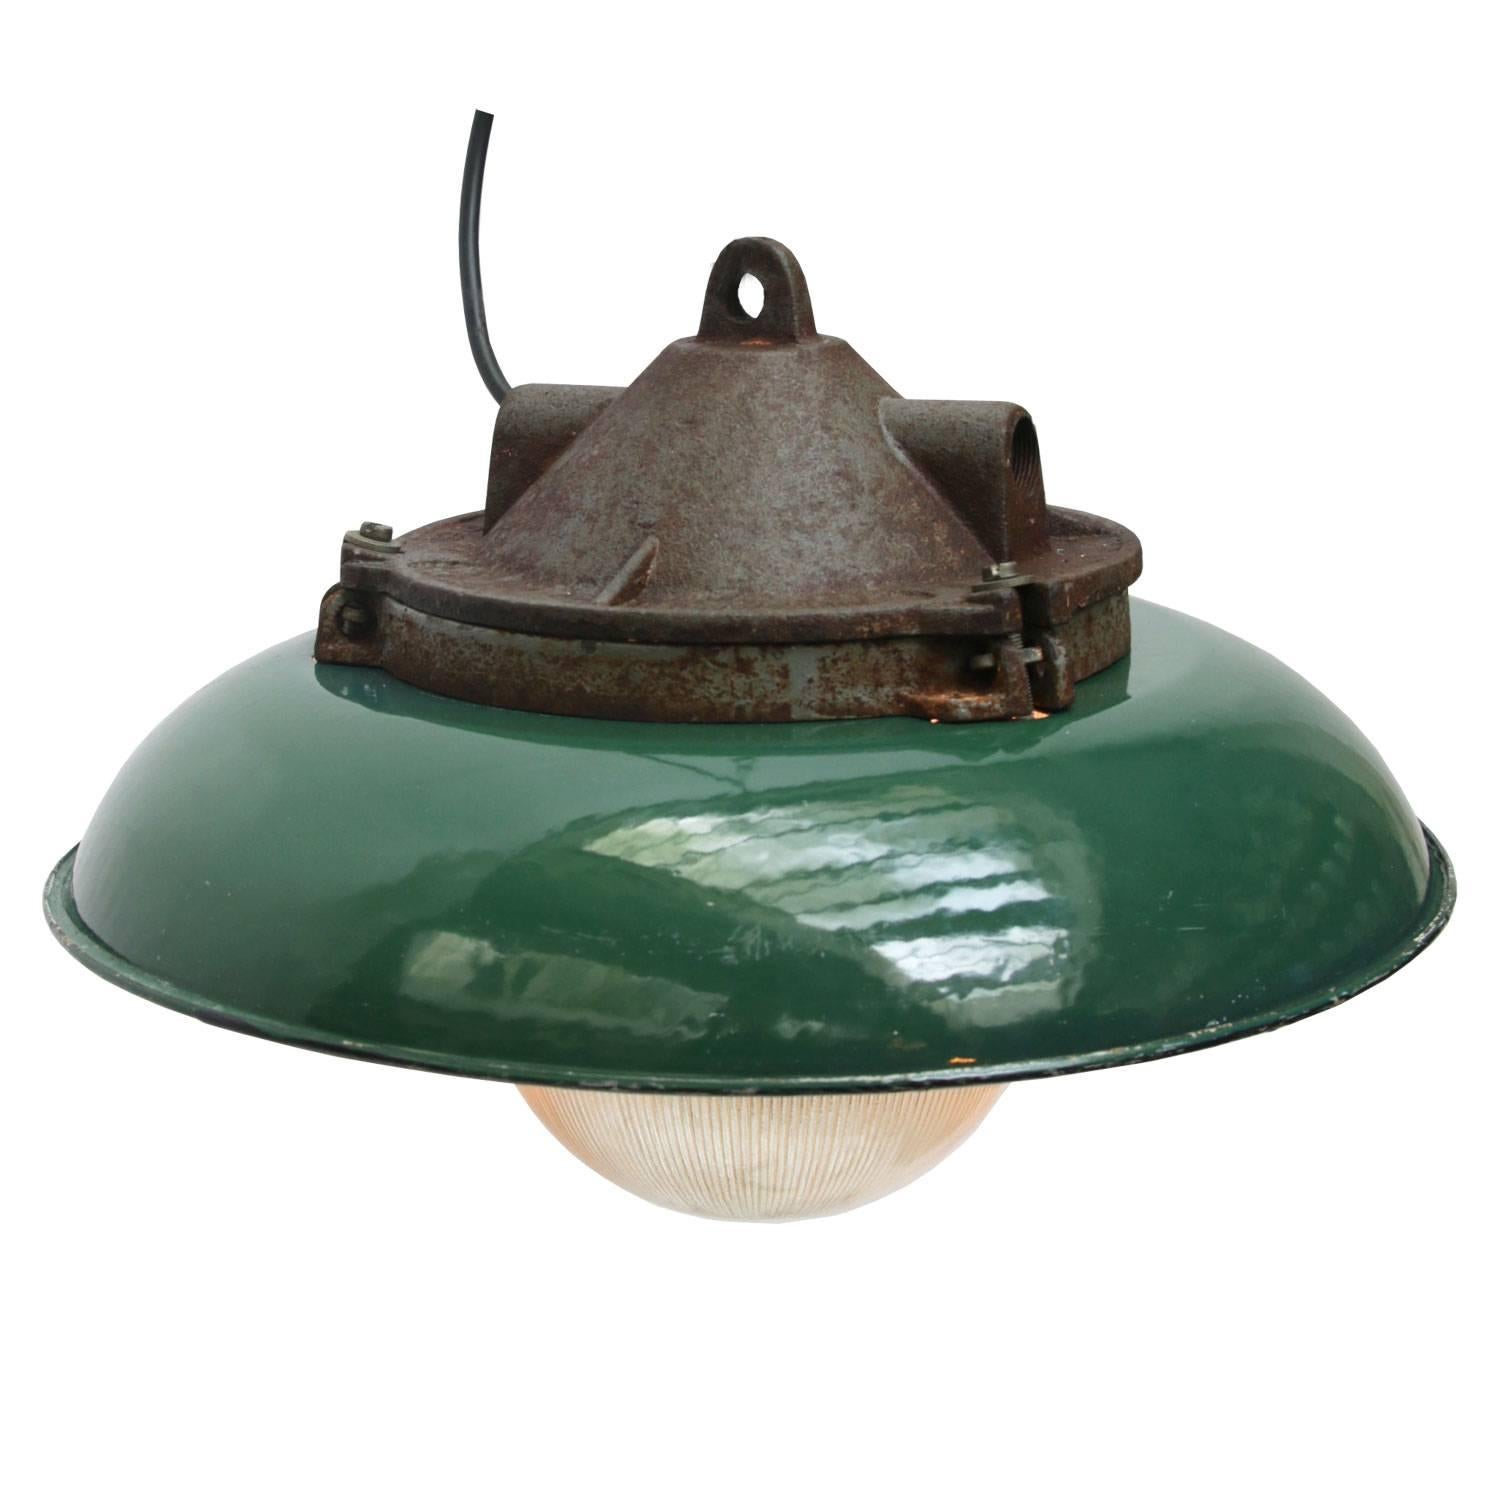 Homi green sans. Industrial factory pendant. Green enamel shade.
Cast iron top. Holophane glass.

Weight: 6.0 kg / 13.2 lb

All lamps have been made suitable by international standards for incandescent light bulbs, energy-efficient and LED